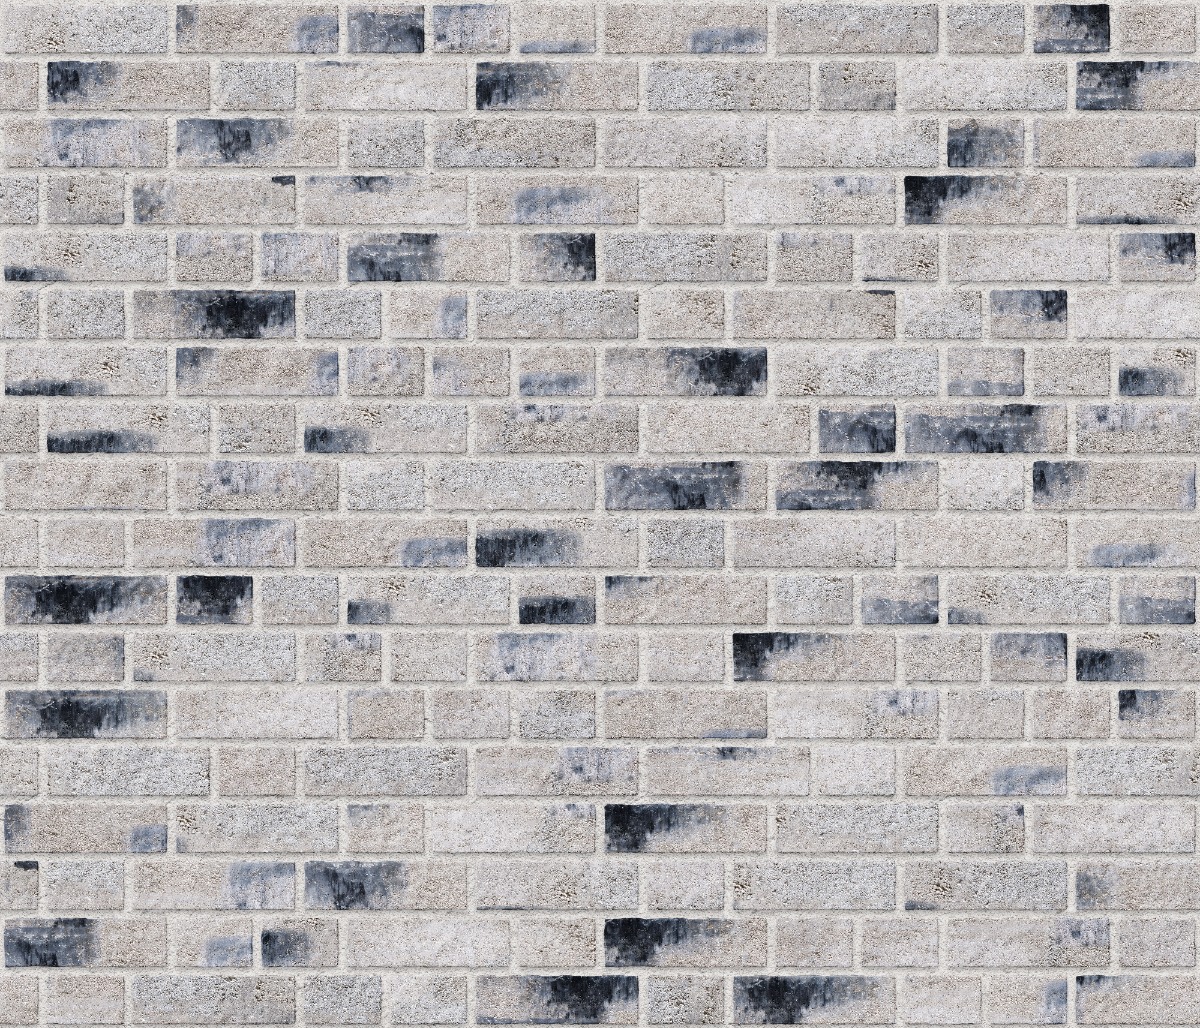 A seamless brick texture with charcoal brick units arranged in a Random Bond pattern